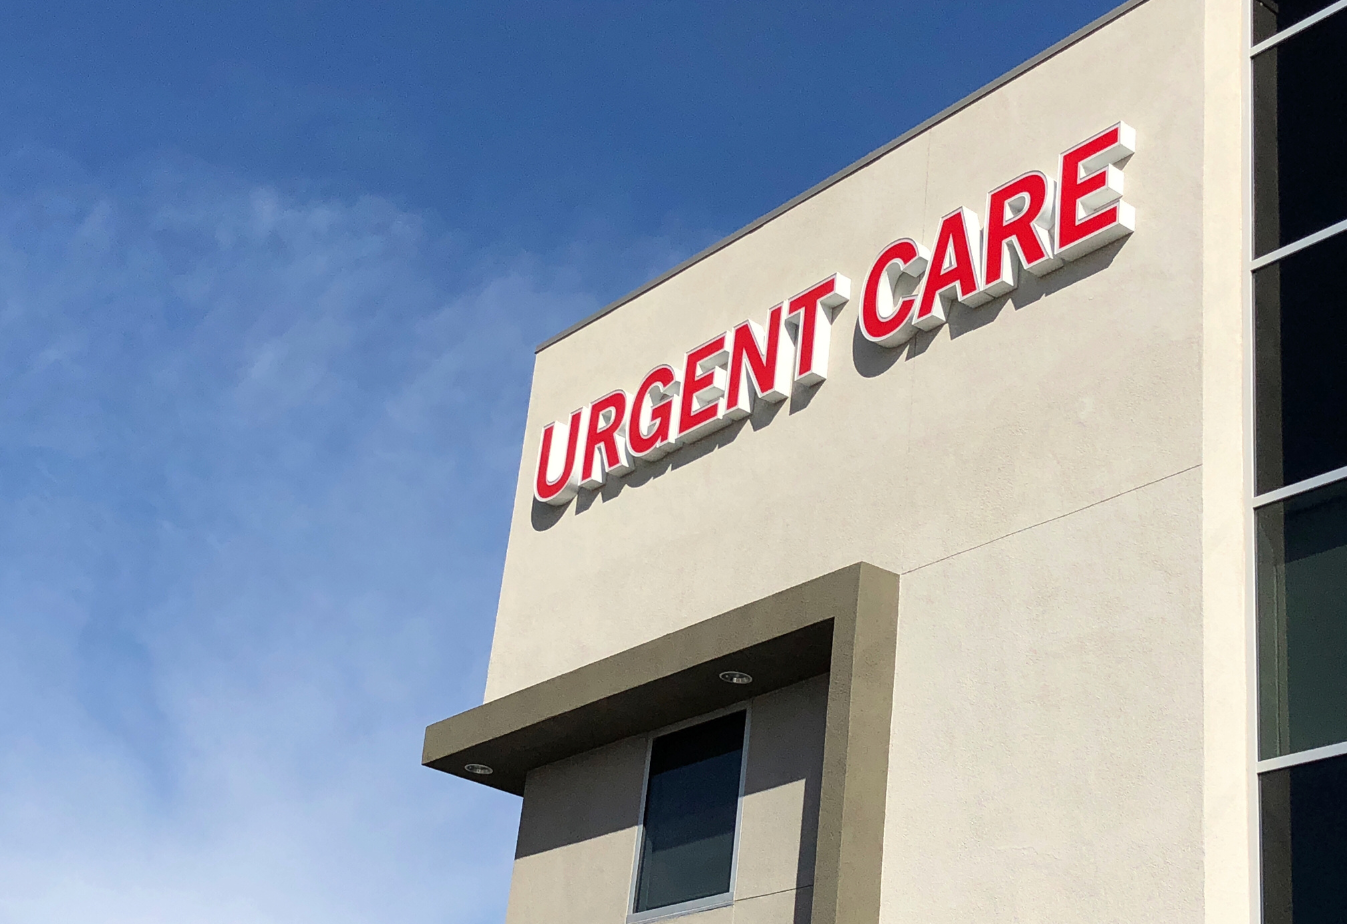 Outside view of a building with an Urgent Care sign against a blue sky with few clouds